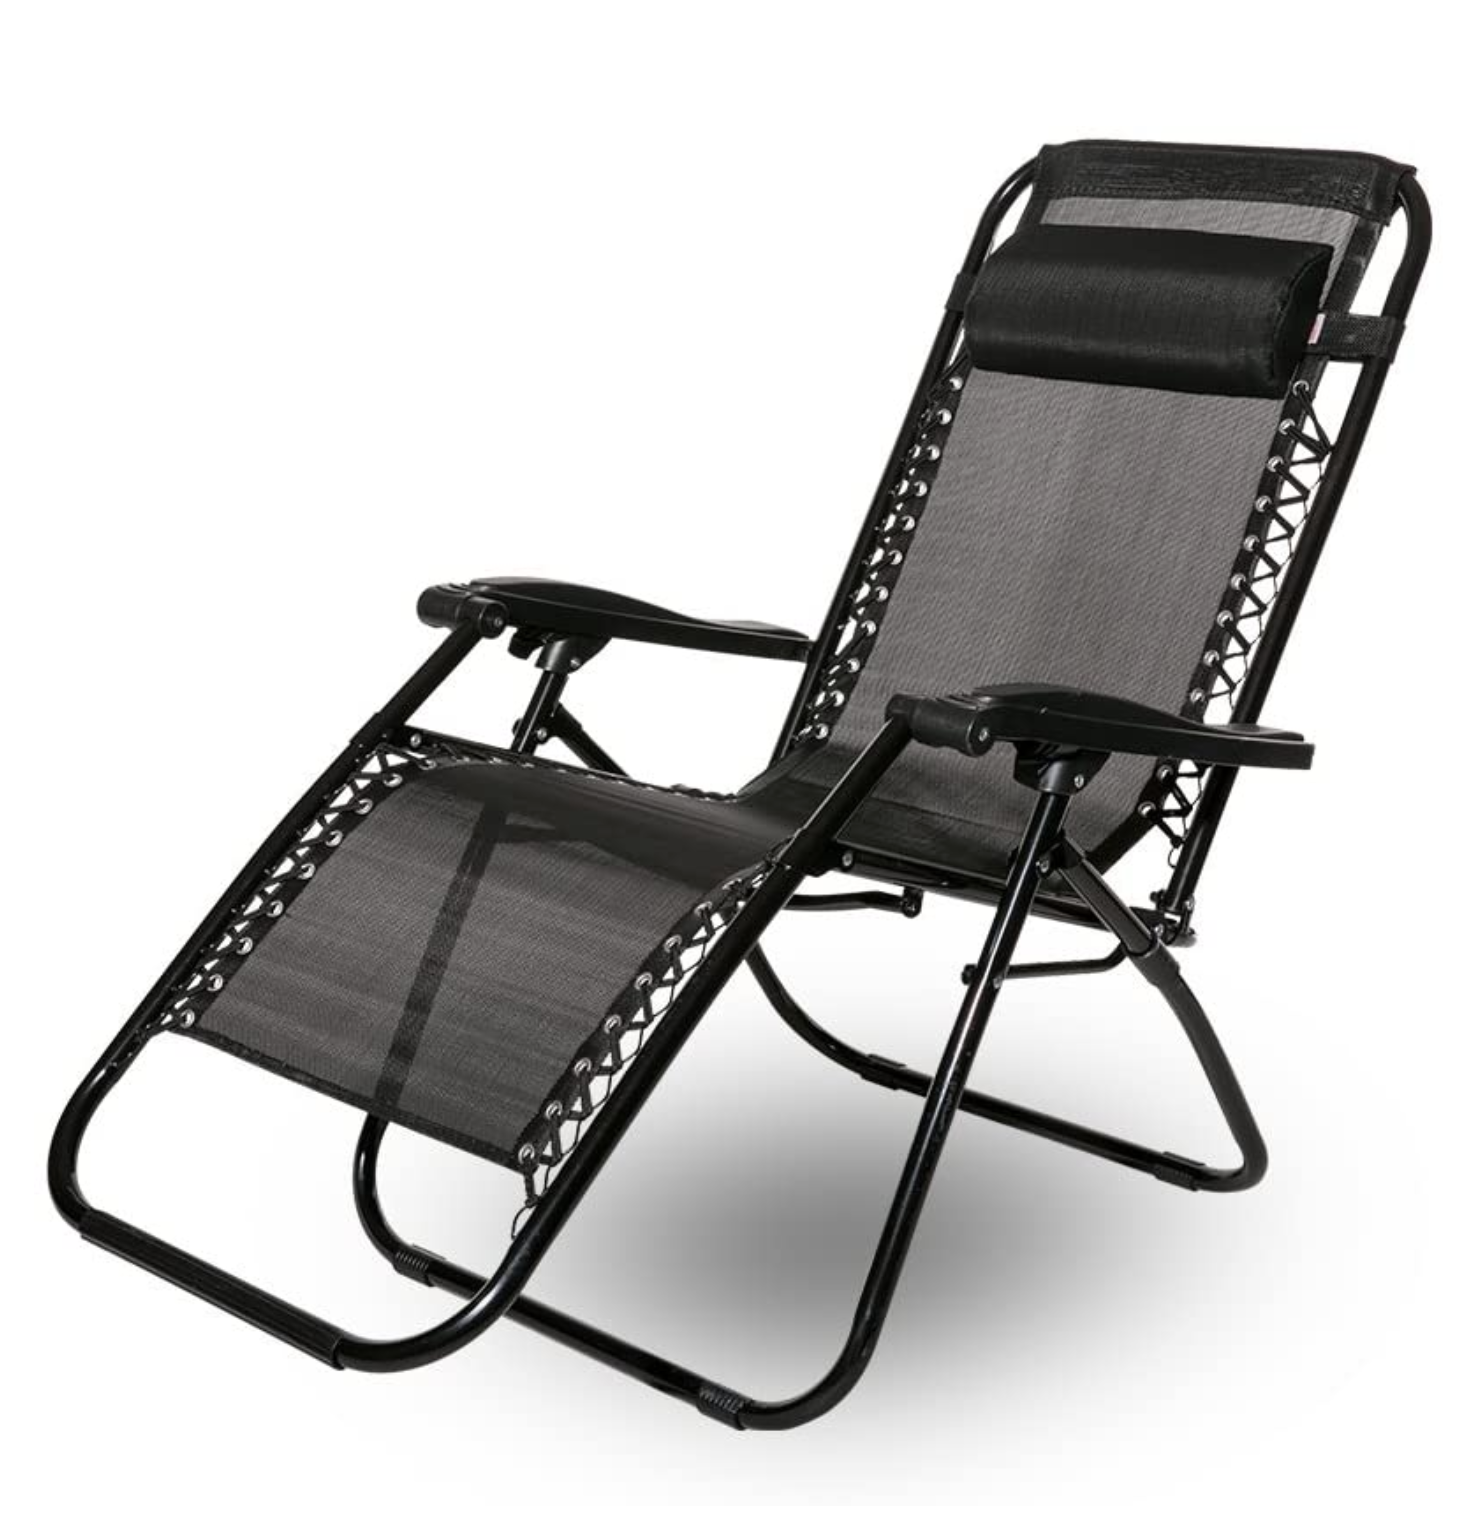 Outdoor patio sunloungers